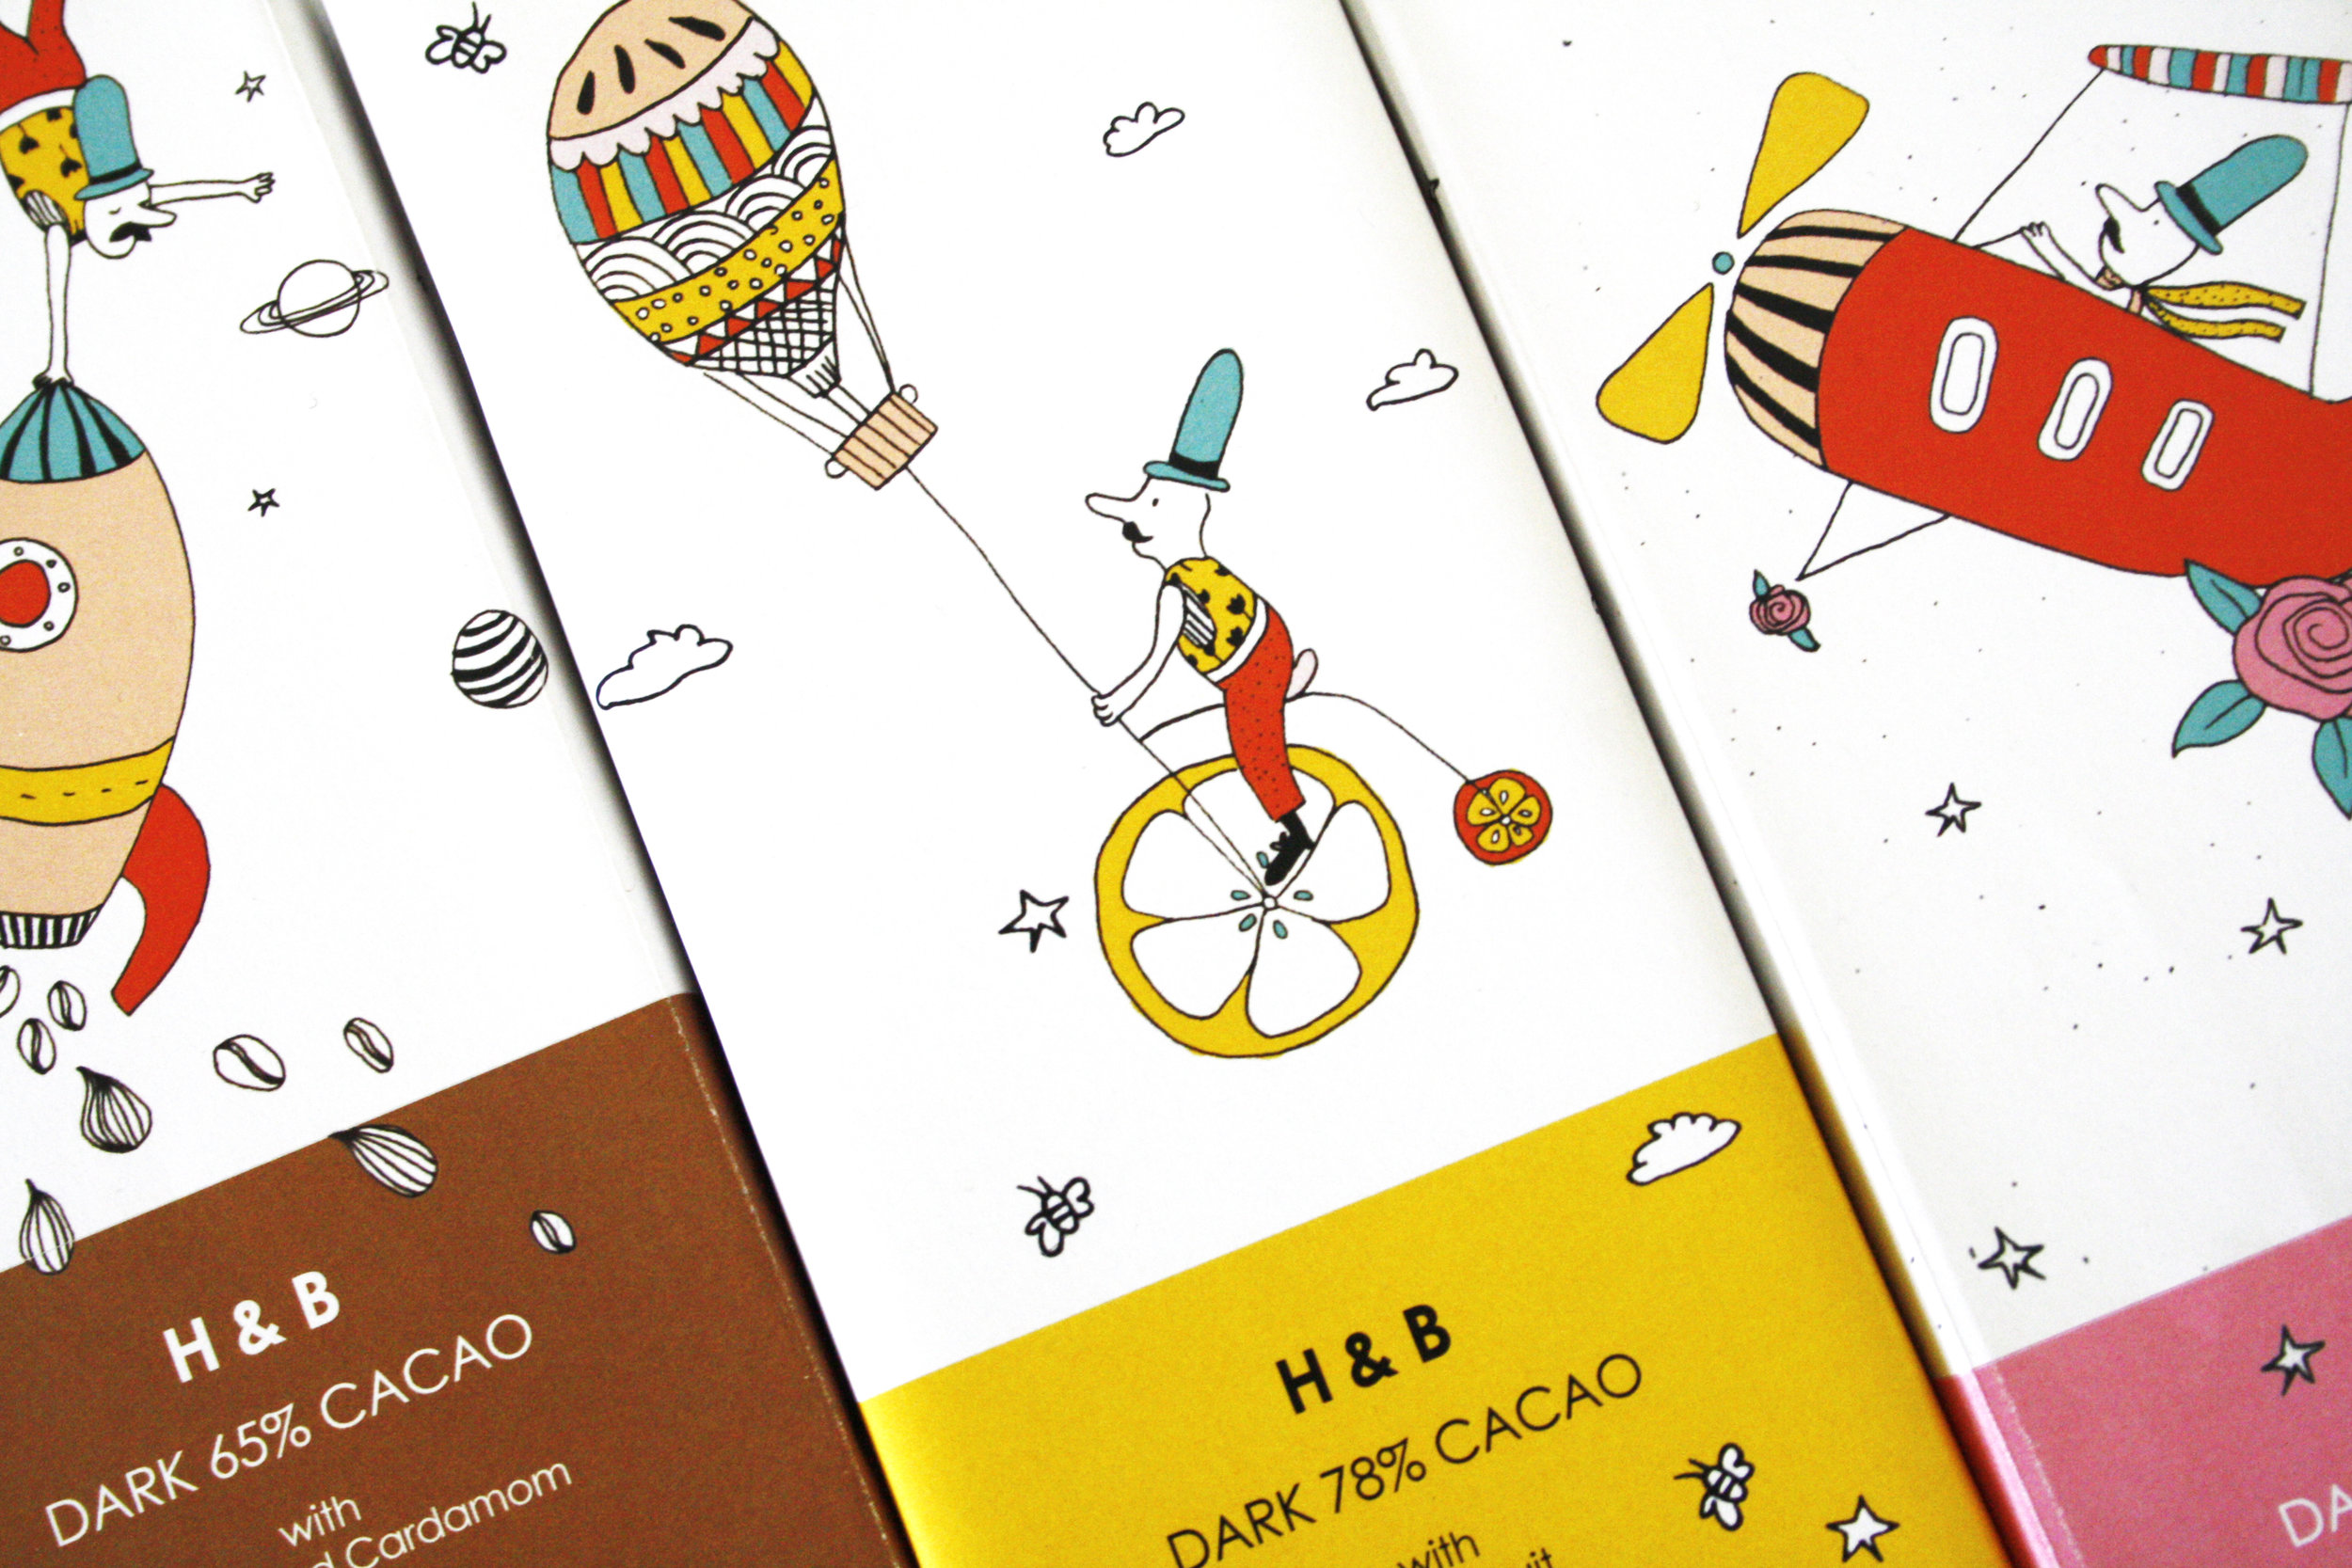 Student Fantasy Concept for Chocolate Packaging Design